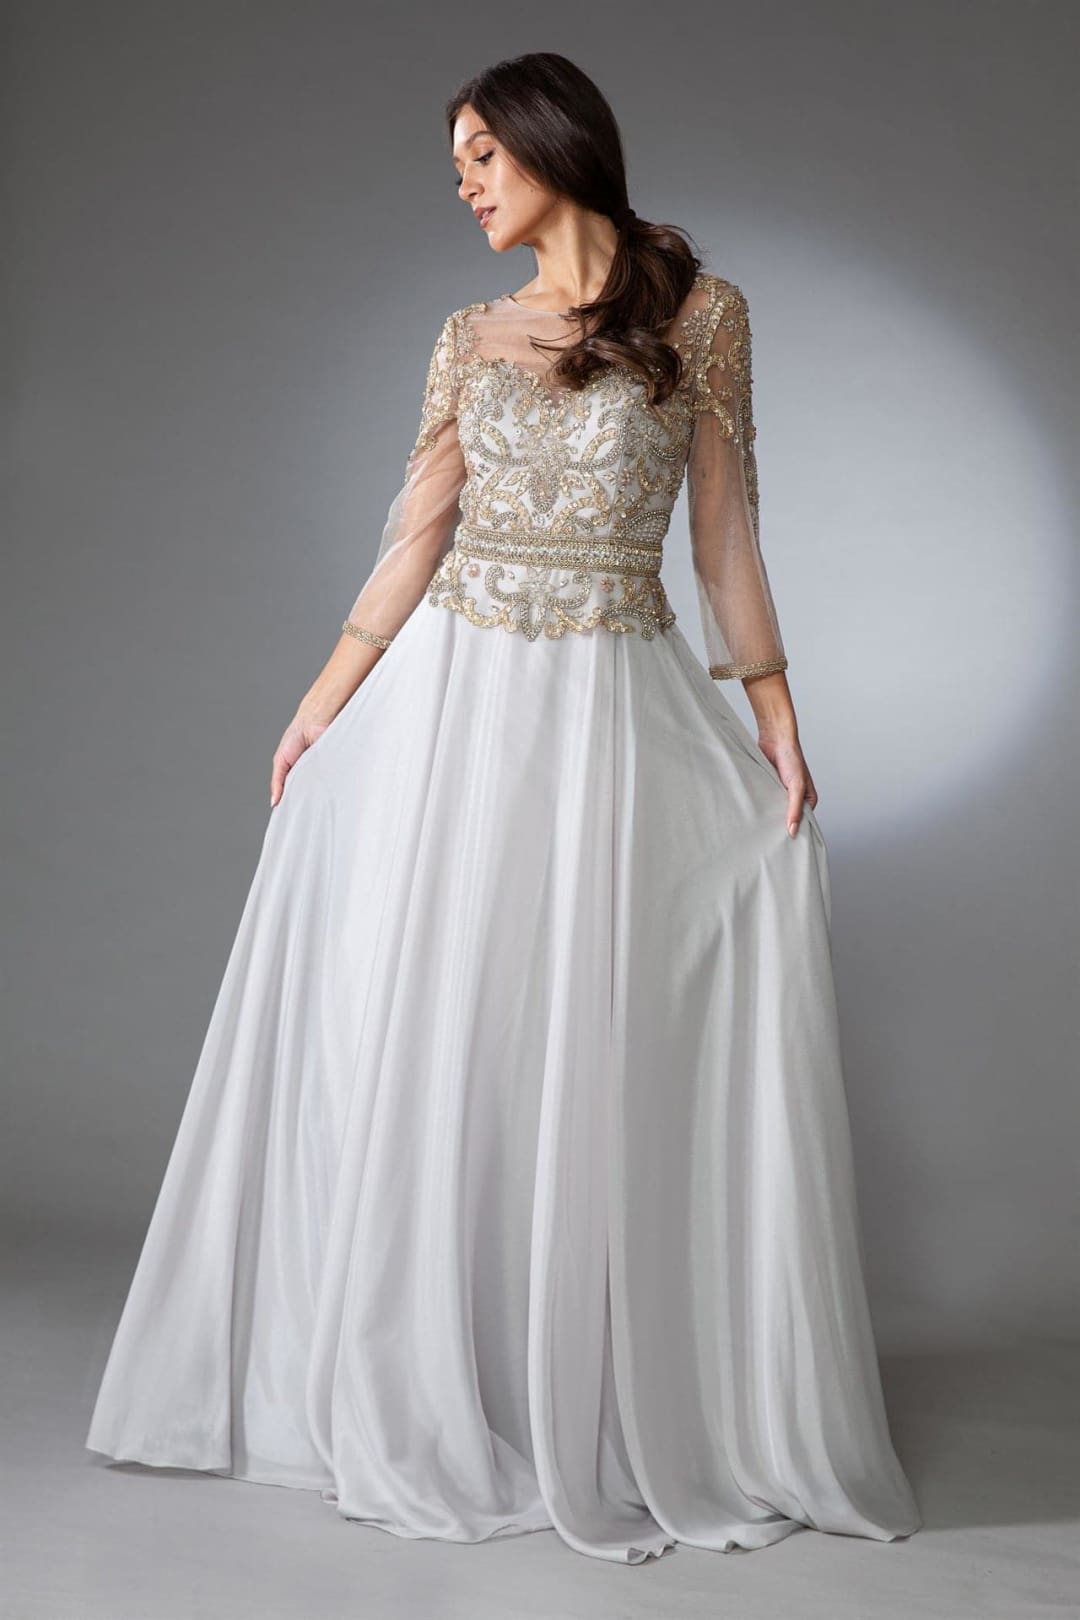 Amelia Couture 7041 Illusion 3/4 Sleeve Mother of the Groom Gown - Dress